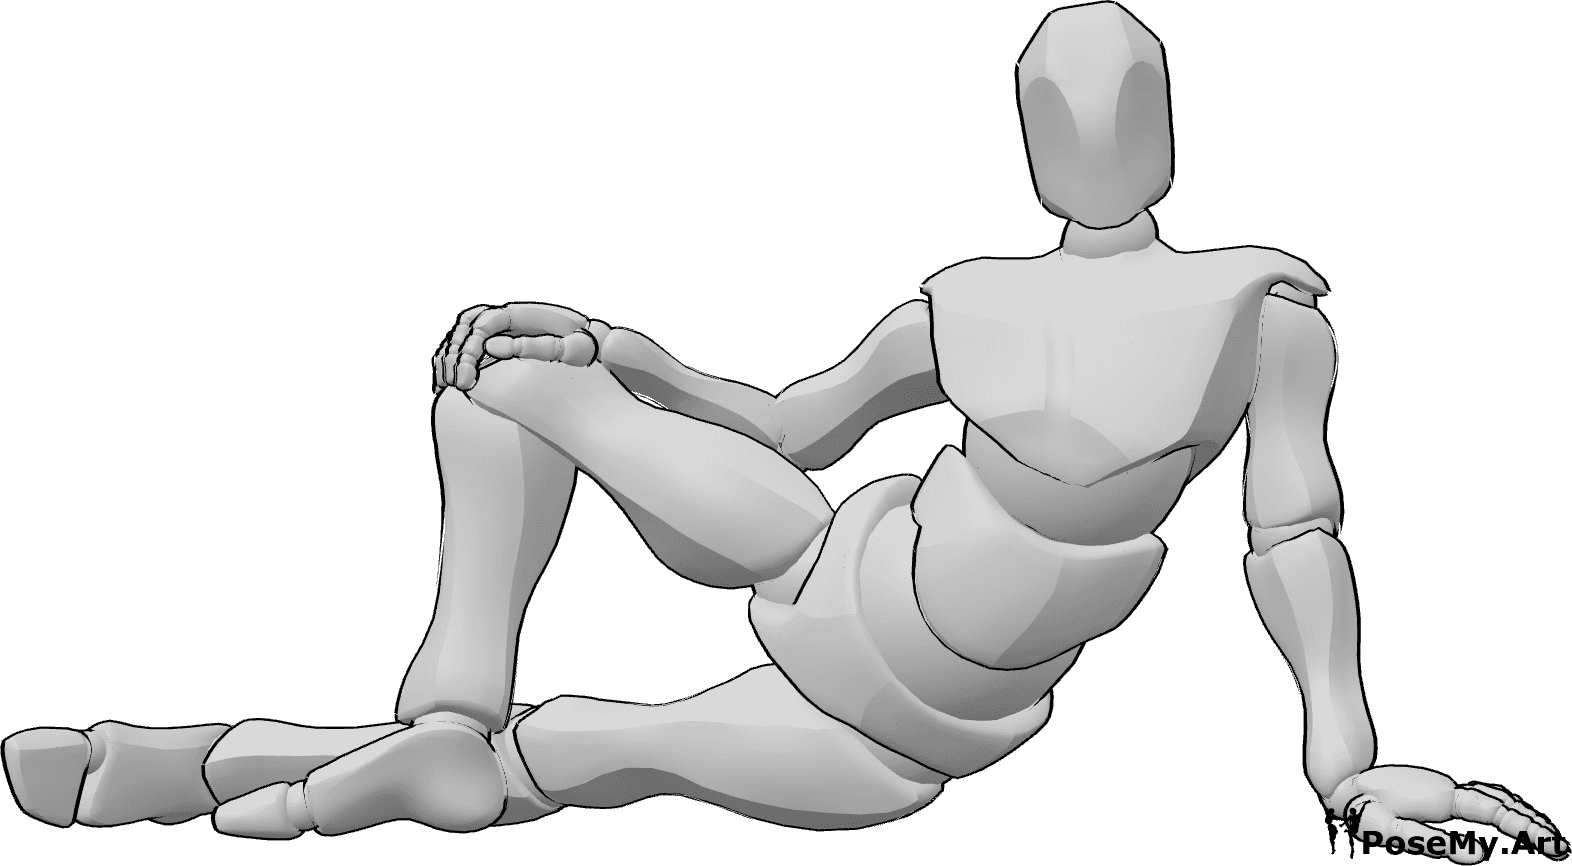 Pose Reference- Male lying model pose - Male model is lying and posing